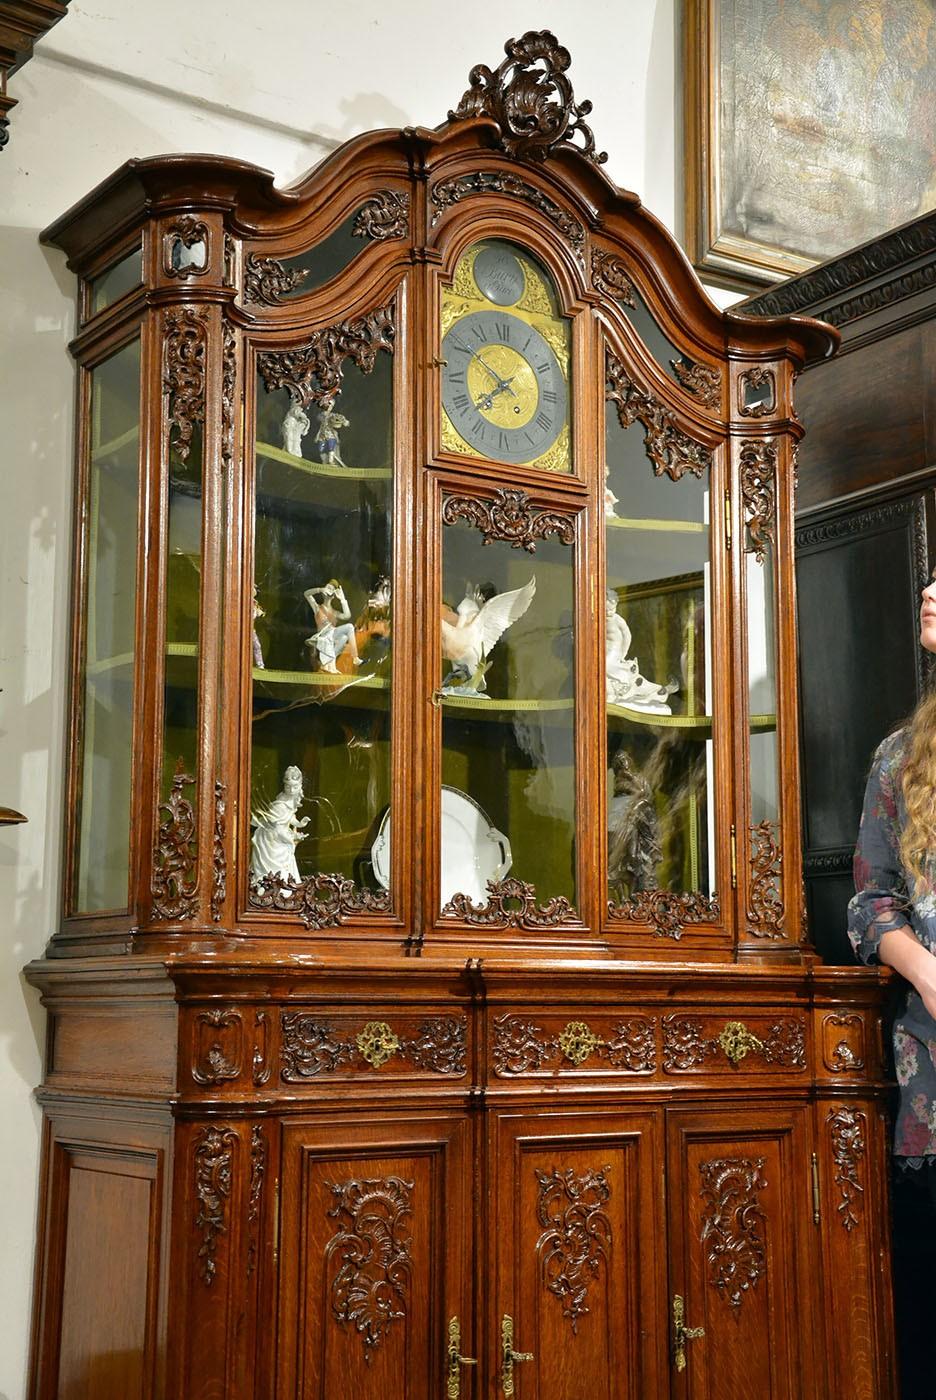 An unusual Rococo style cupboard with clock. Made of oak, dated to the second half of the 19th century.
Furniture after professional renovation.
Noteworthy are the original, old cast glass, openwork decorations characteristic of the style and,